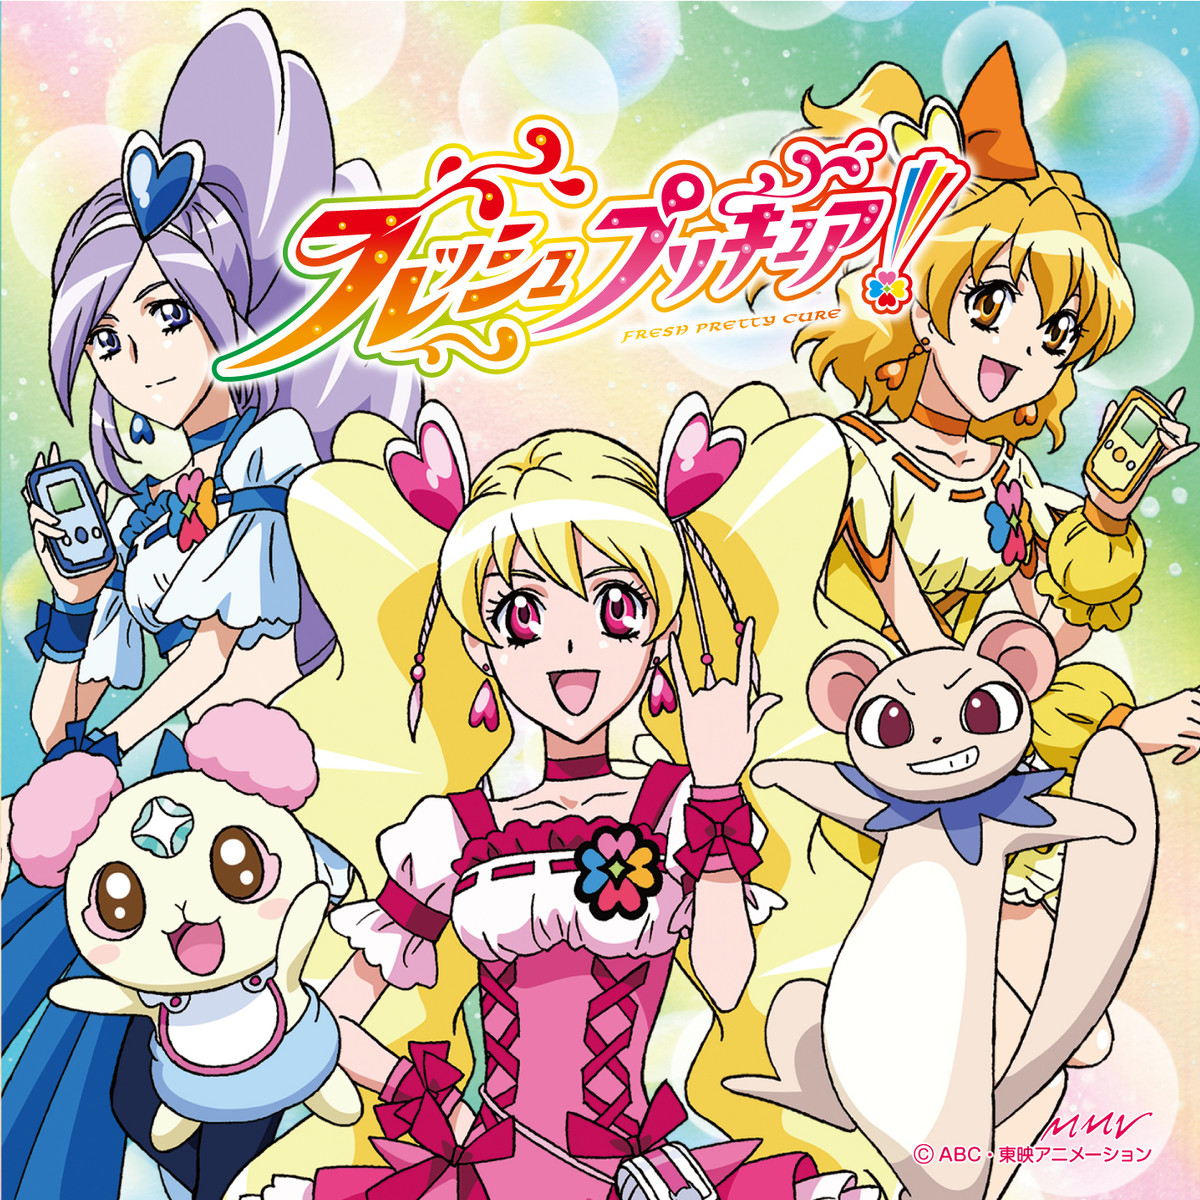 Stream Fresh Pretty Cure Ending 1 - You Make Me Happy by The Anime and  Disney Boy Fan 2022